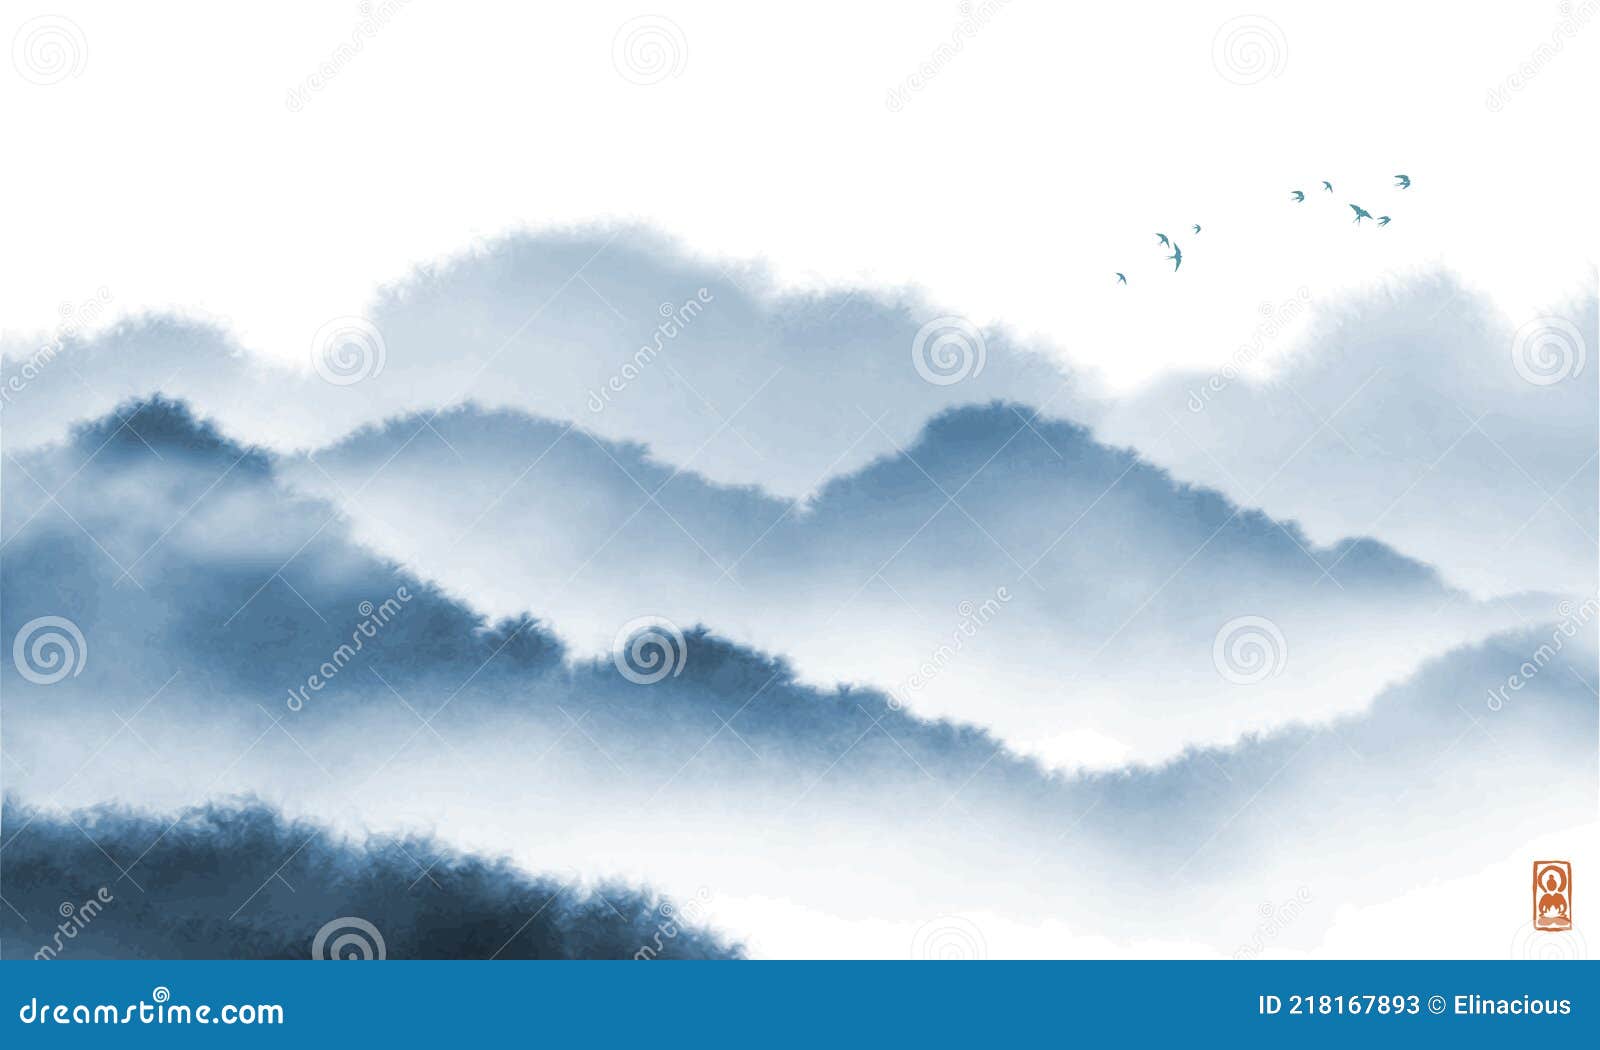 landscape with blue misty forest mountains. traditional oriental ink painting sumi-e, u-sin, go-hua.